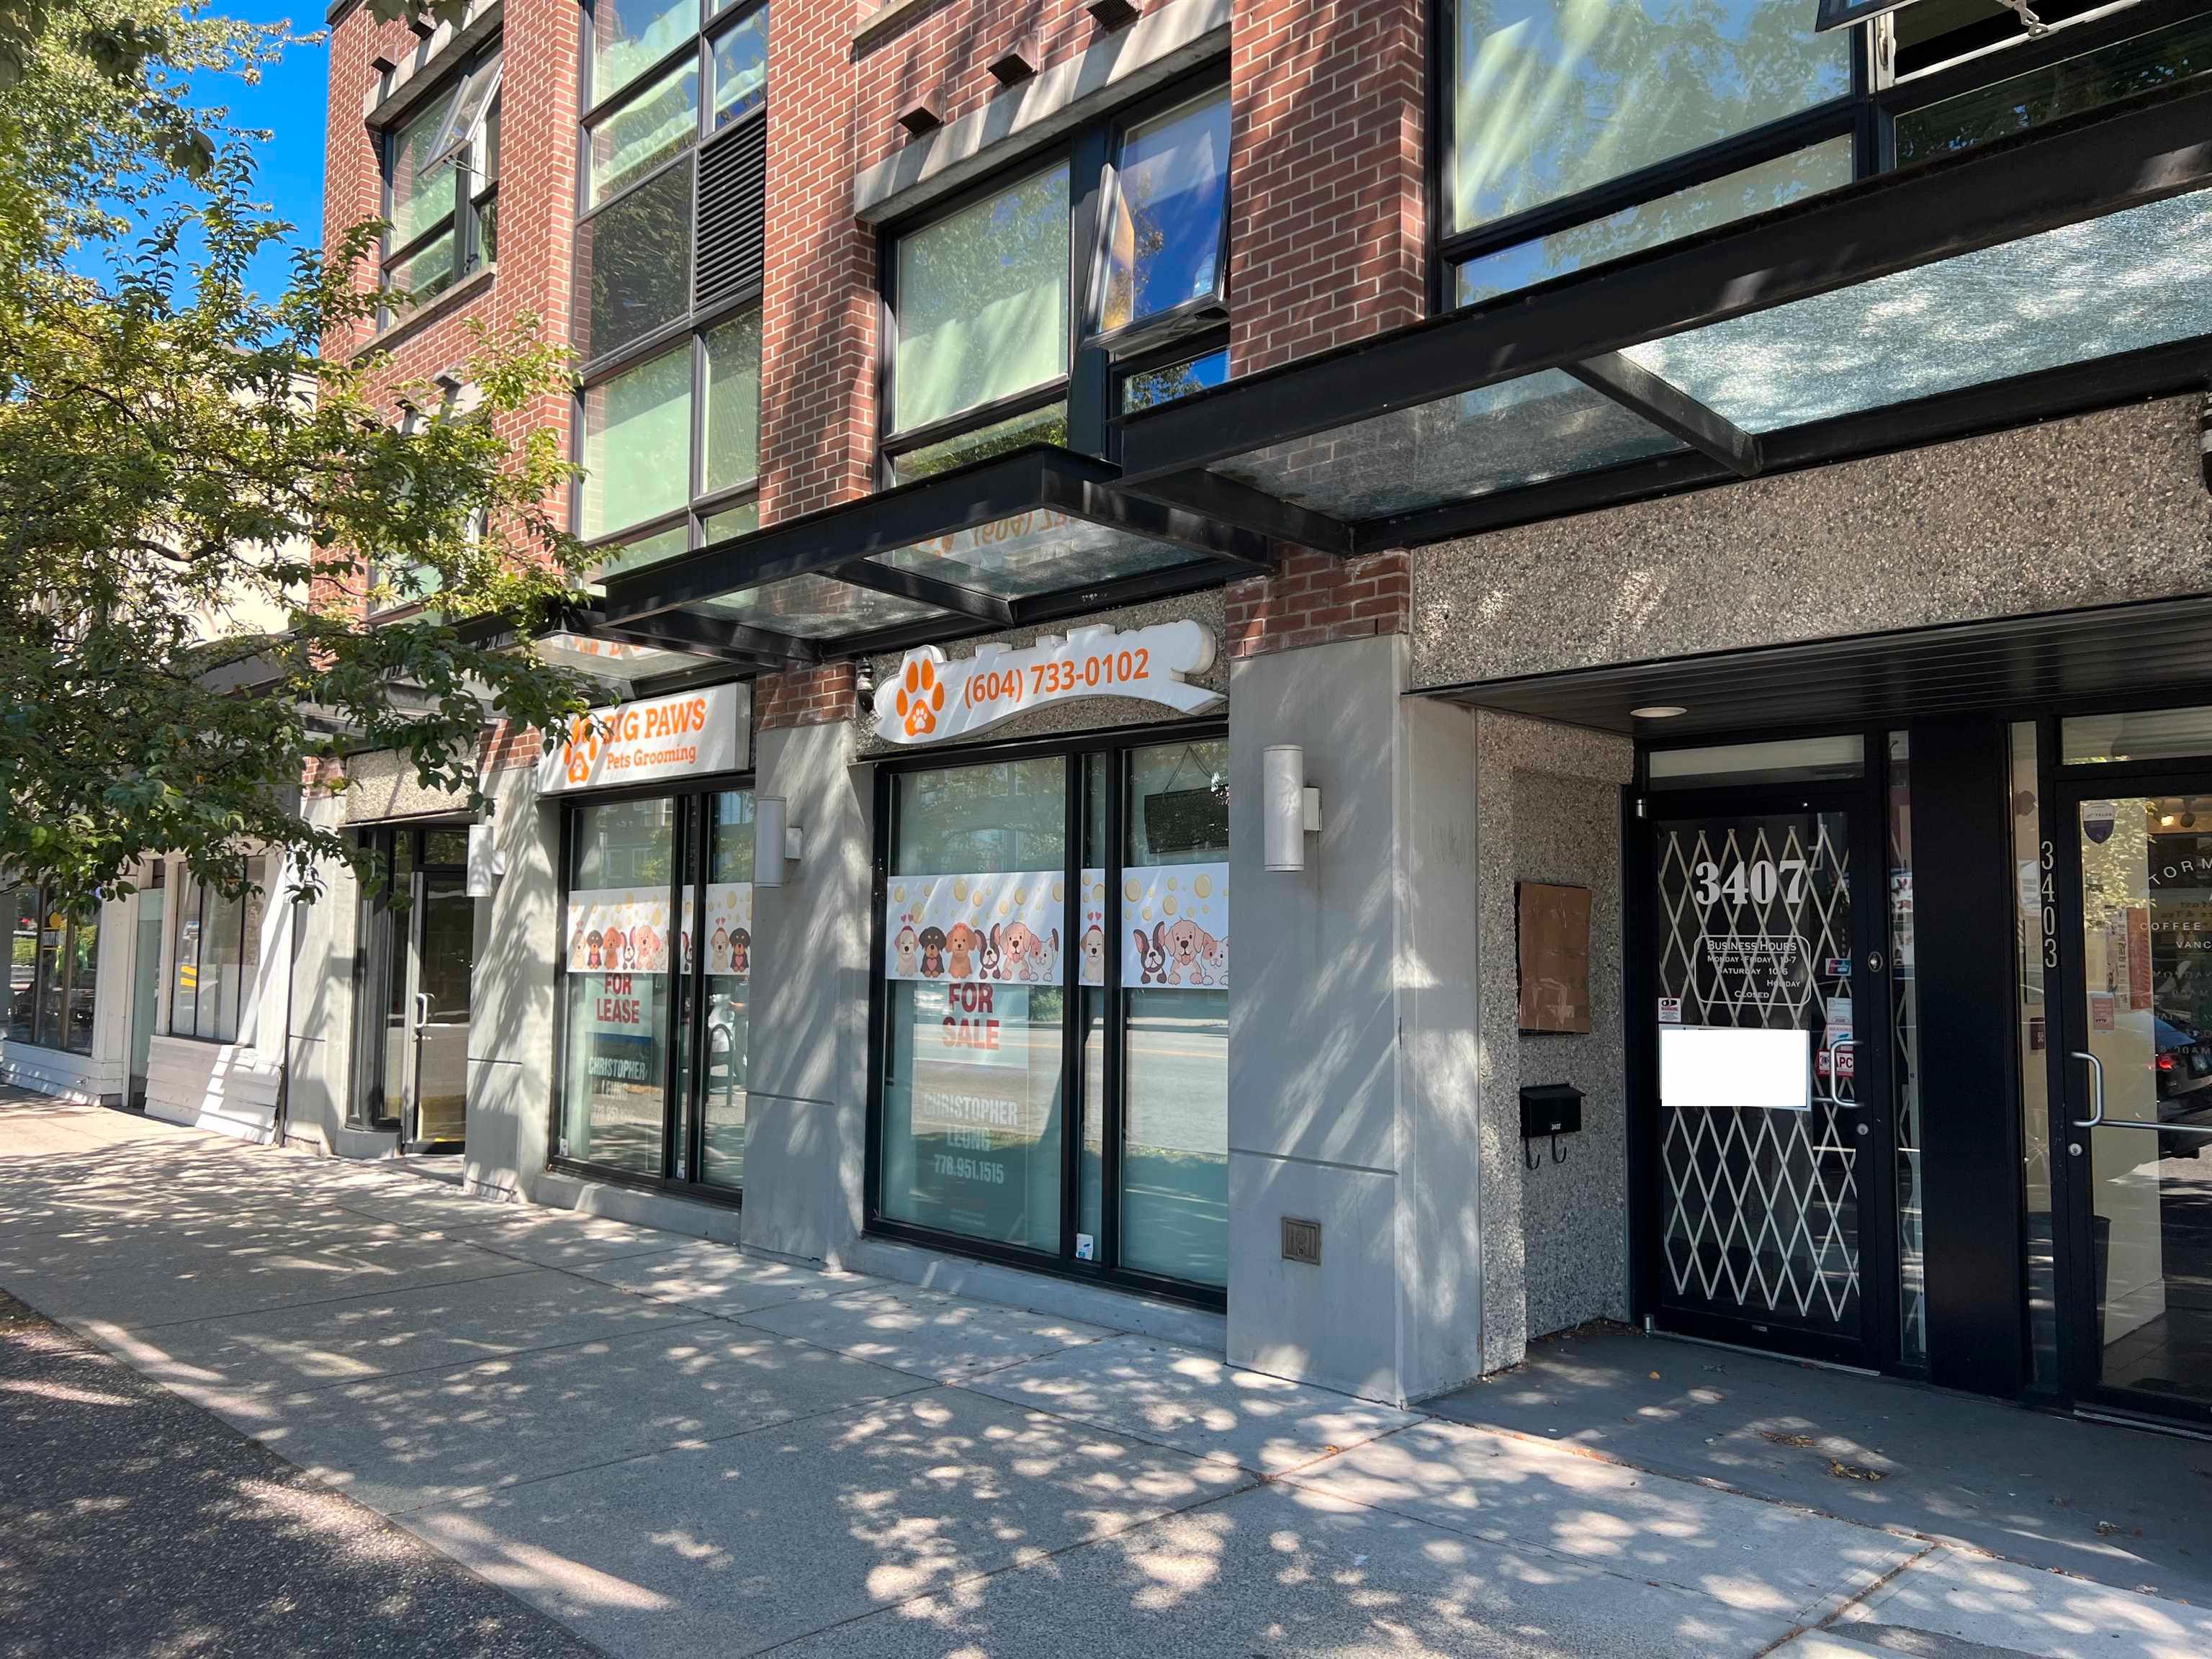 Main Photo: 3407 W BROADWAY Street in Vancouver: Kitsilano Retail for lease (Vancouver West)  : MLS®# C8052848